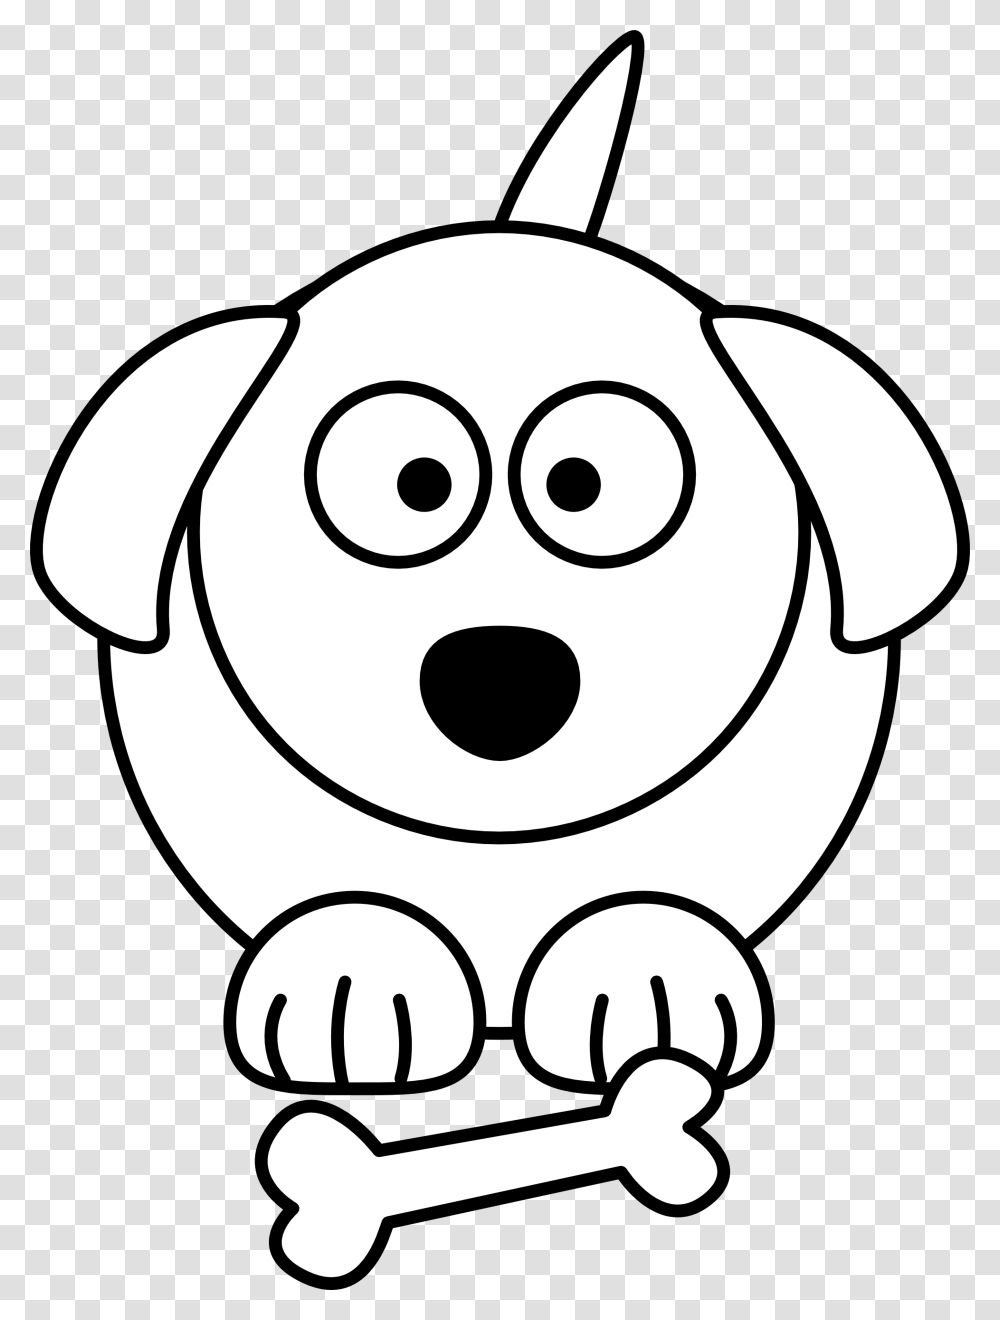 Black And White Cartoon Animals Clipart Free To Use Clip Art, Snowman, Winter, Outdoors, Nature Transparent Png